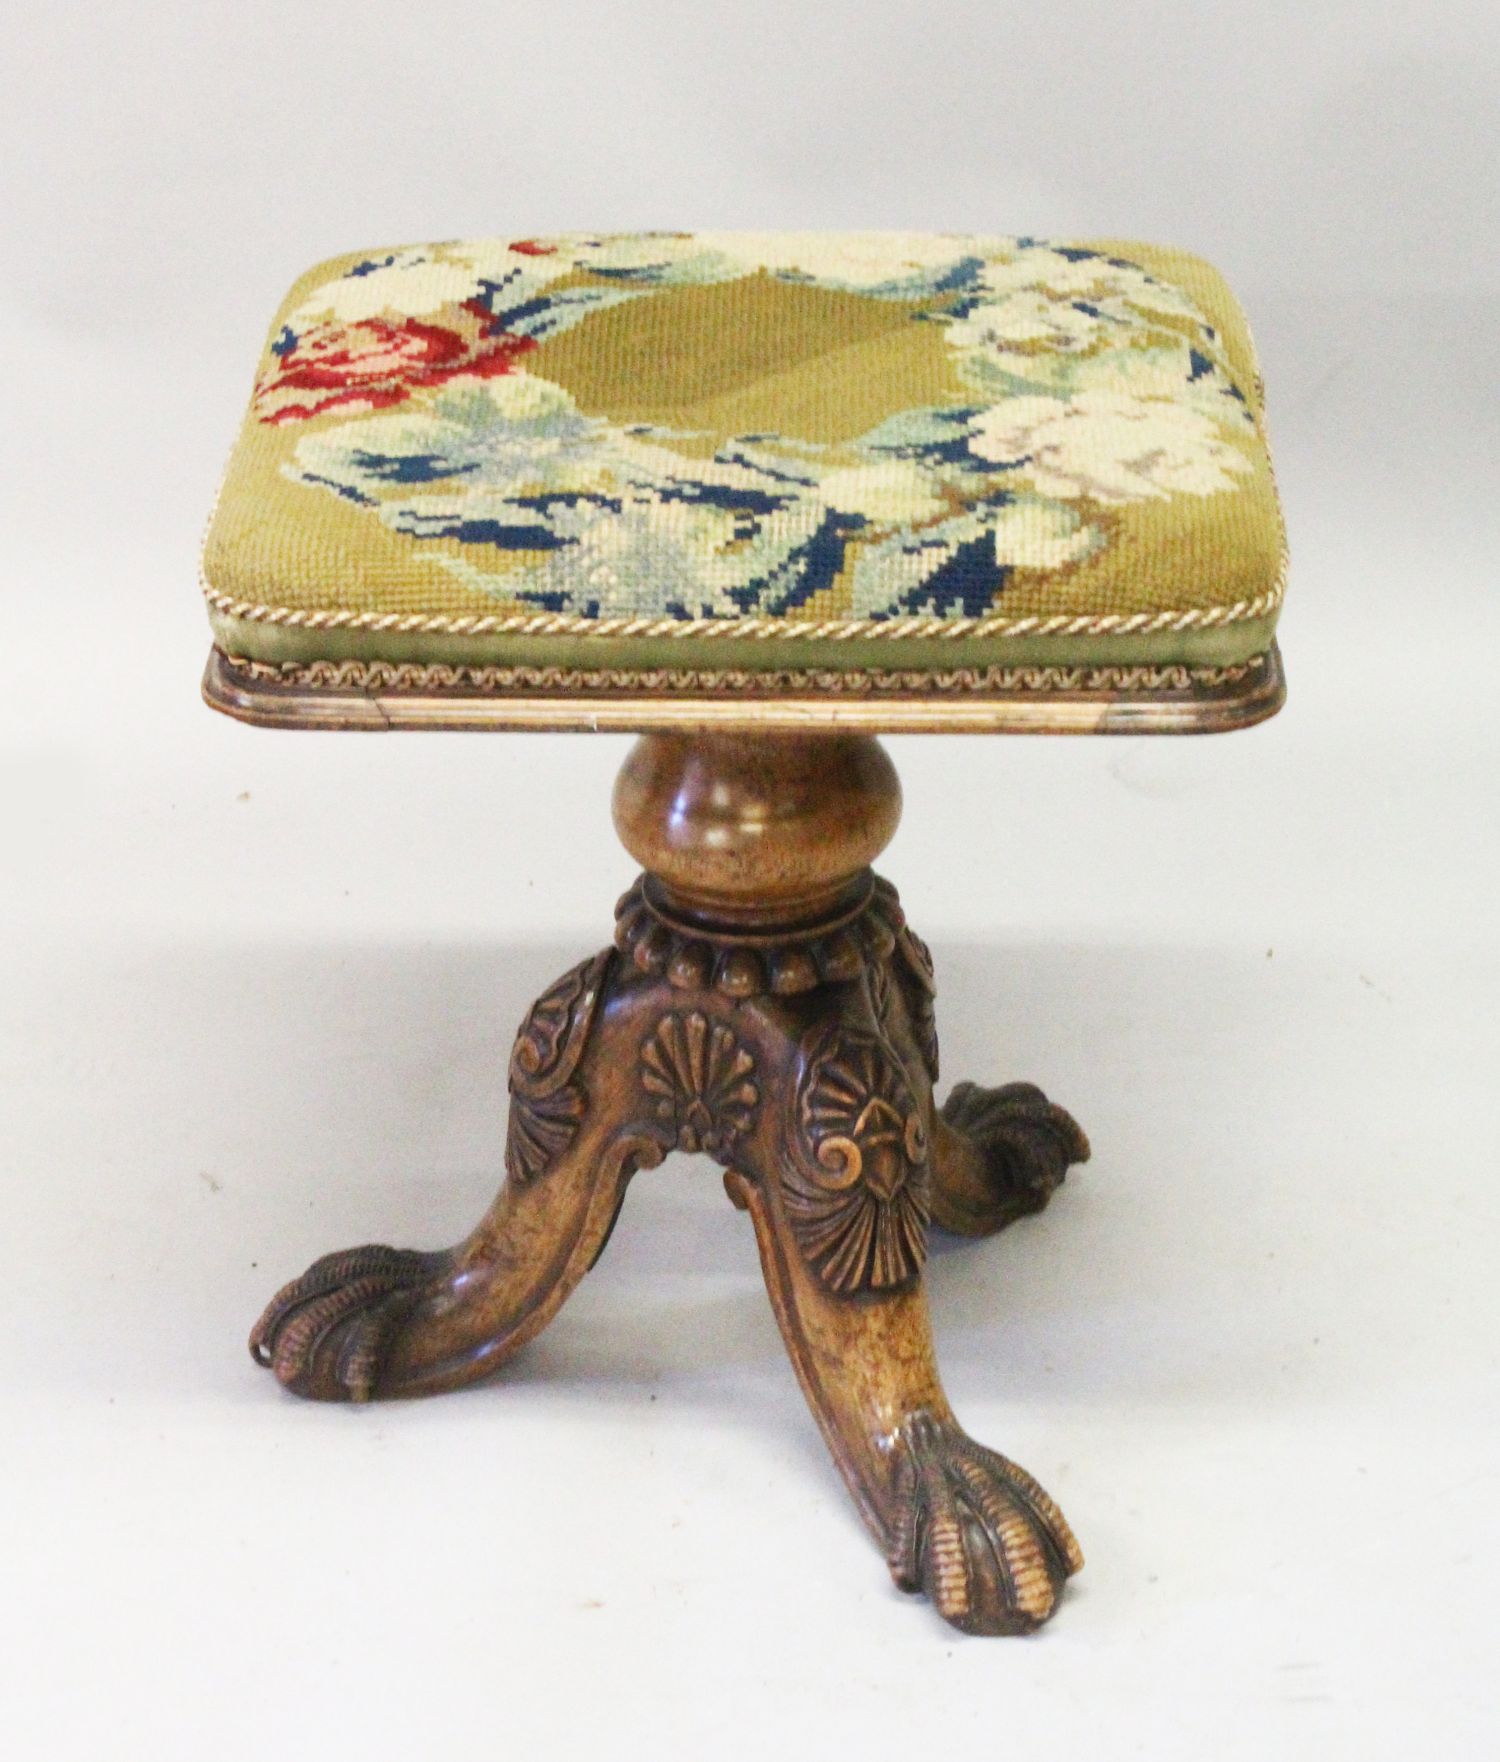 AN EARLY 20TH CENTURY WALNUT REVOLVING MUSIC SEAT, with needlework upholstered seat, on a turned